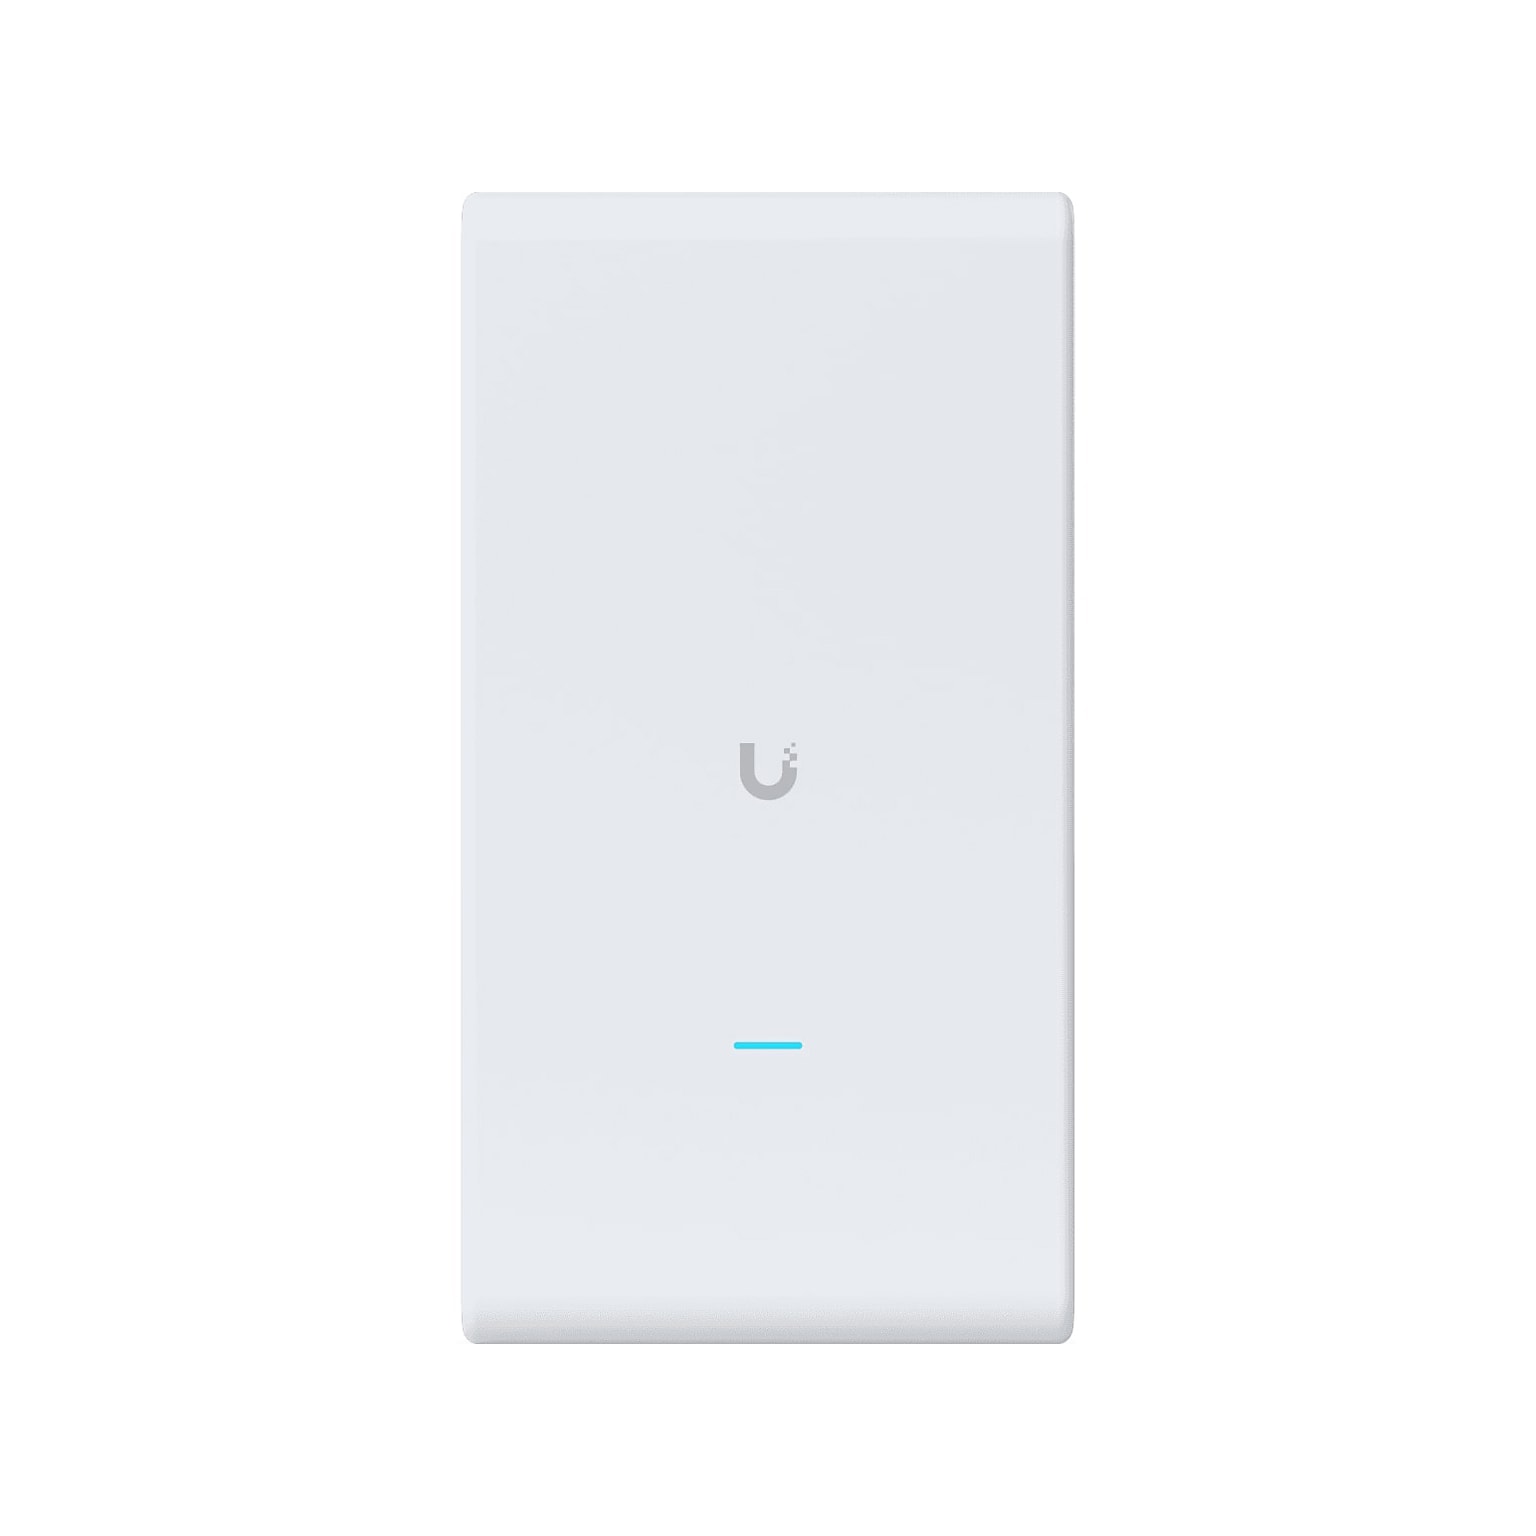 Ubiquiti AC Mesh Professional 1.3Gbps Dual Band PoE Wi-Fi 5 Access Point with Mesh Technology, White (UAP-AC-M-PRO-US)